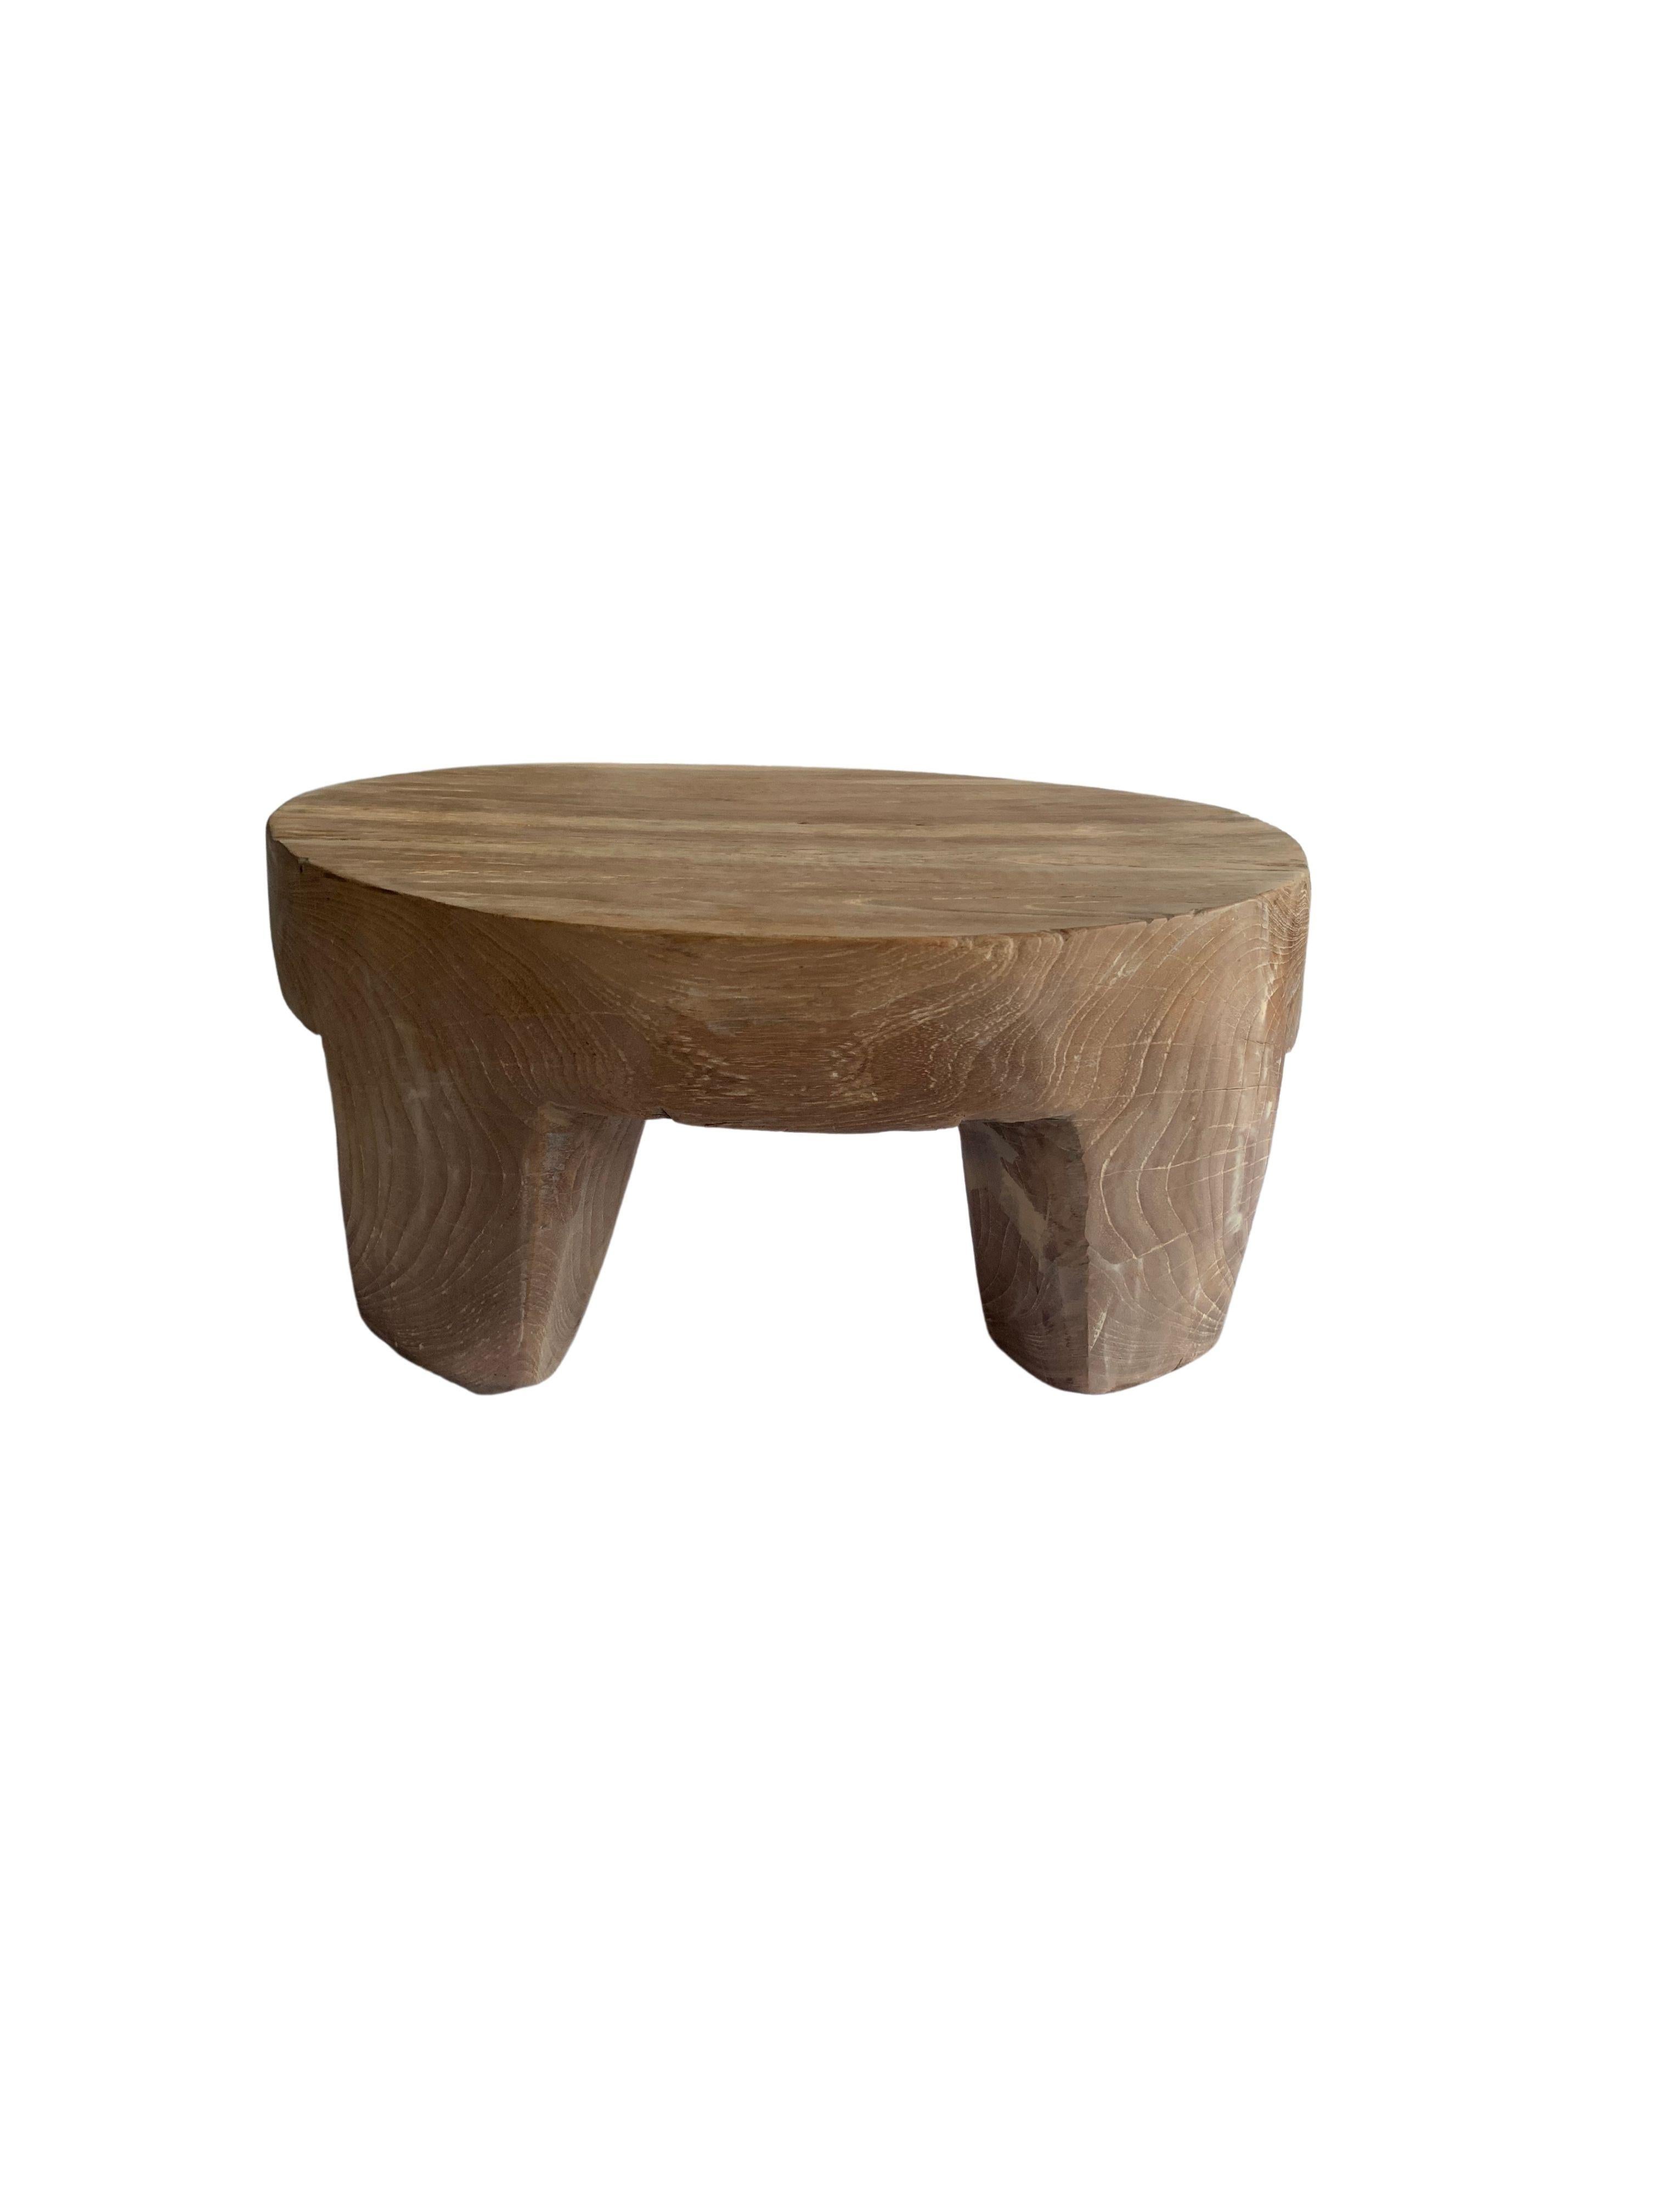 Organic Modern Sculptural Side Table Crafted from Solid Teak Wood  For Sale